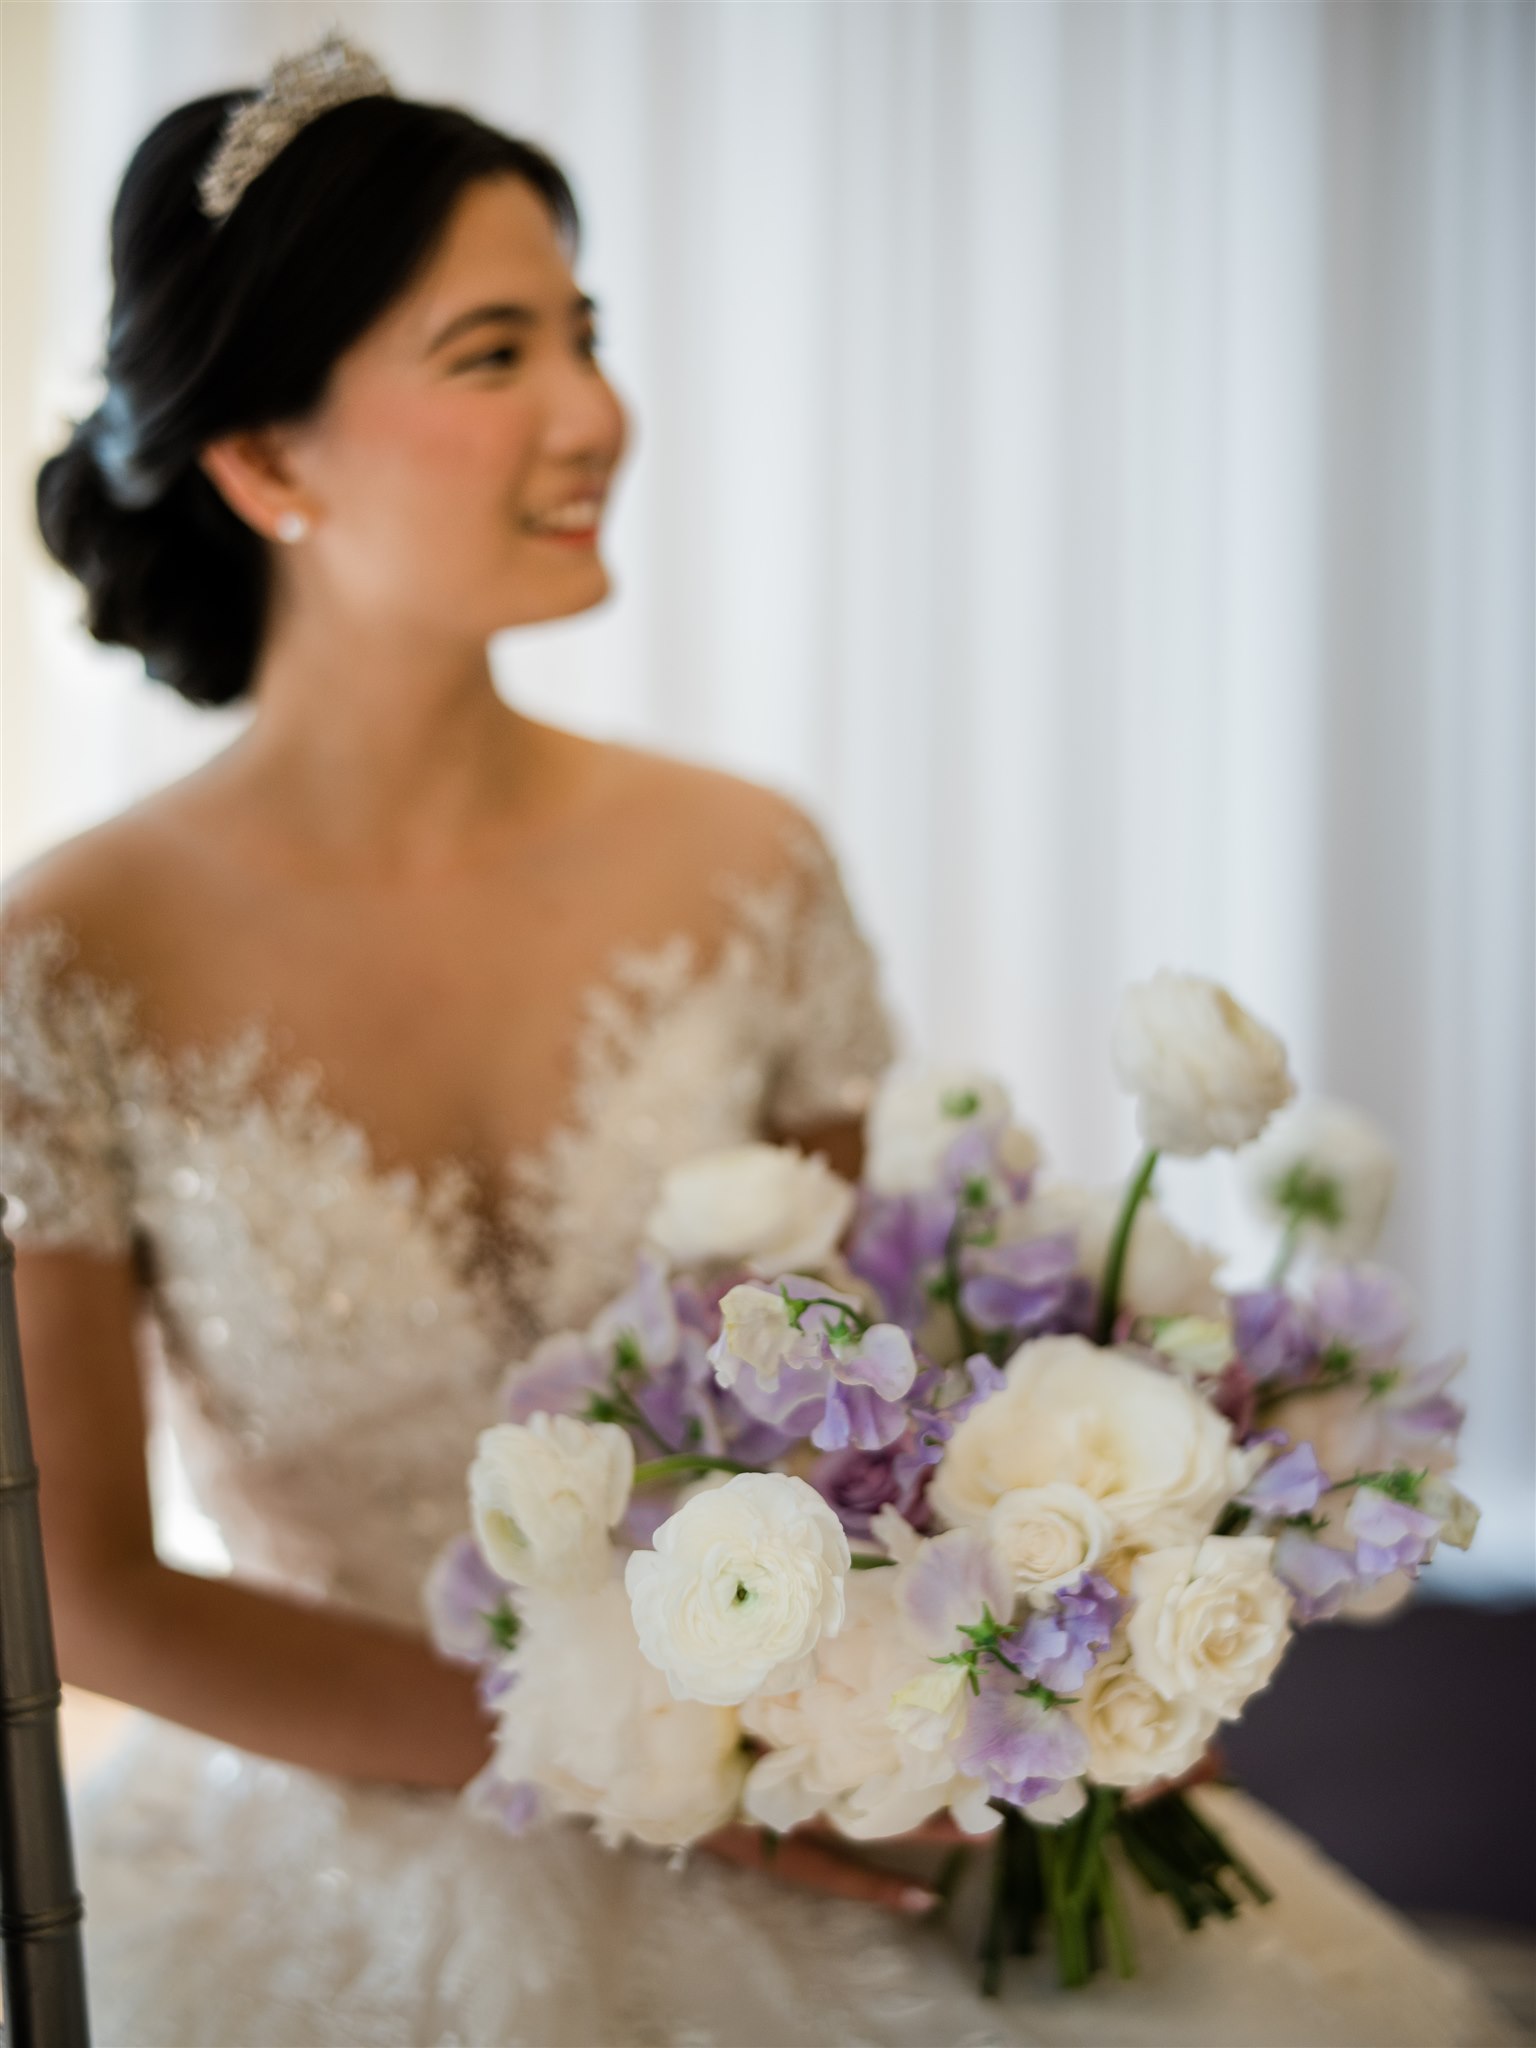 Bride holding a bouquet of white peonies, white ranunculus, purple sweet pea